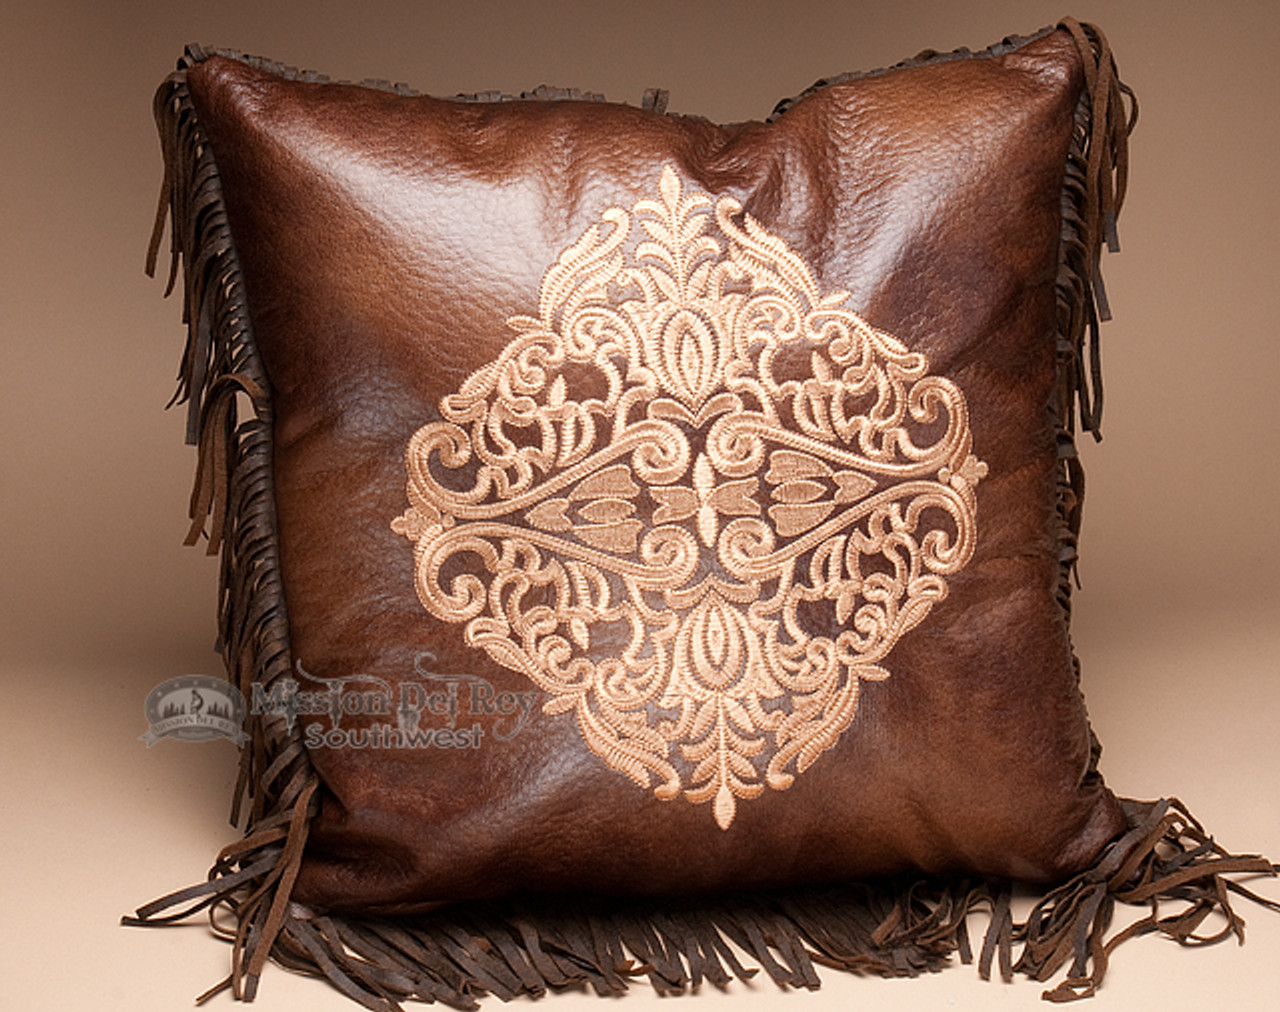 https://cdn11.bigcommerce.com/s-3y1hjx24/images/stencil/1280x1280/products/22593/22594/faux-leather-western-embroidered-pillow-18x18-wp22-4__39706.1481679362.jpg?c=2